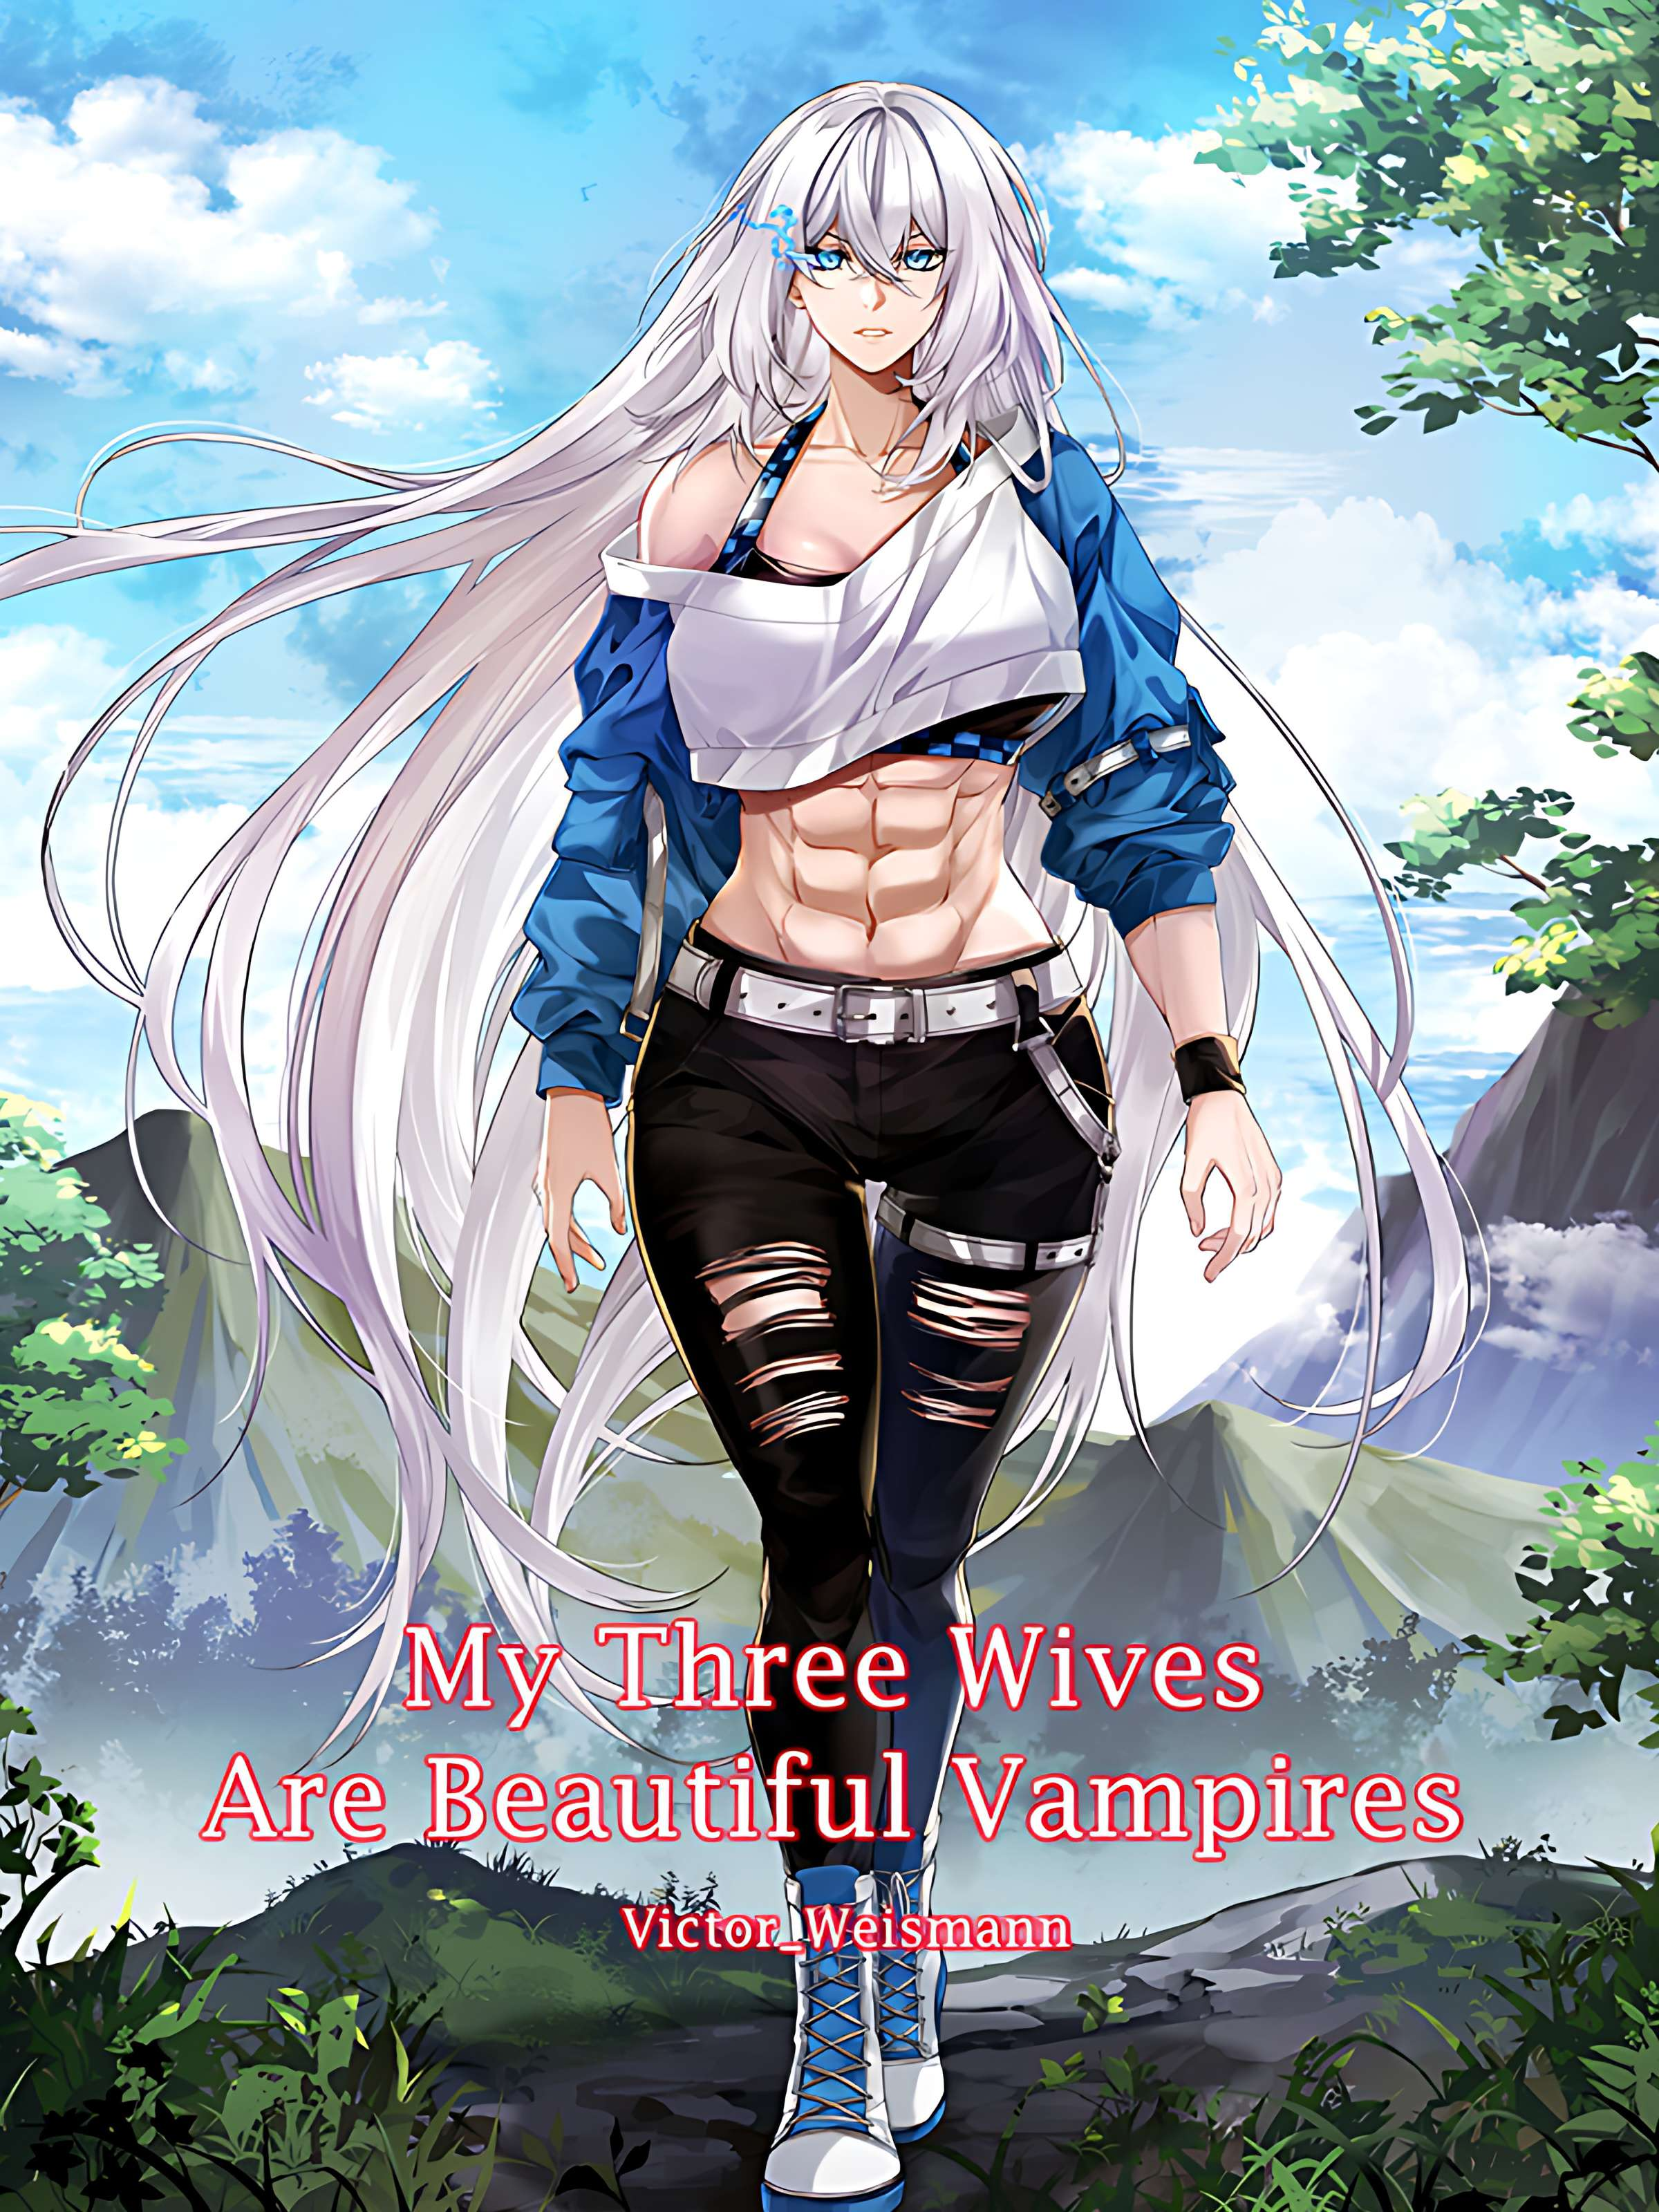 Dragons, My Three Beautiful Wives Are Vampires Wiki